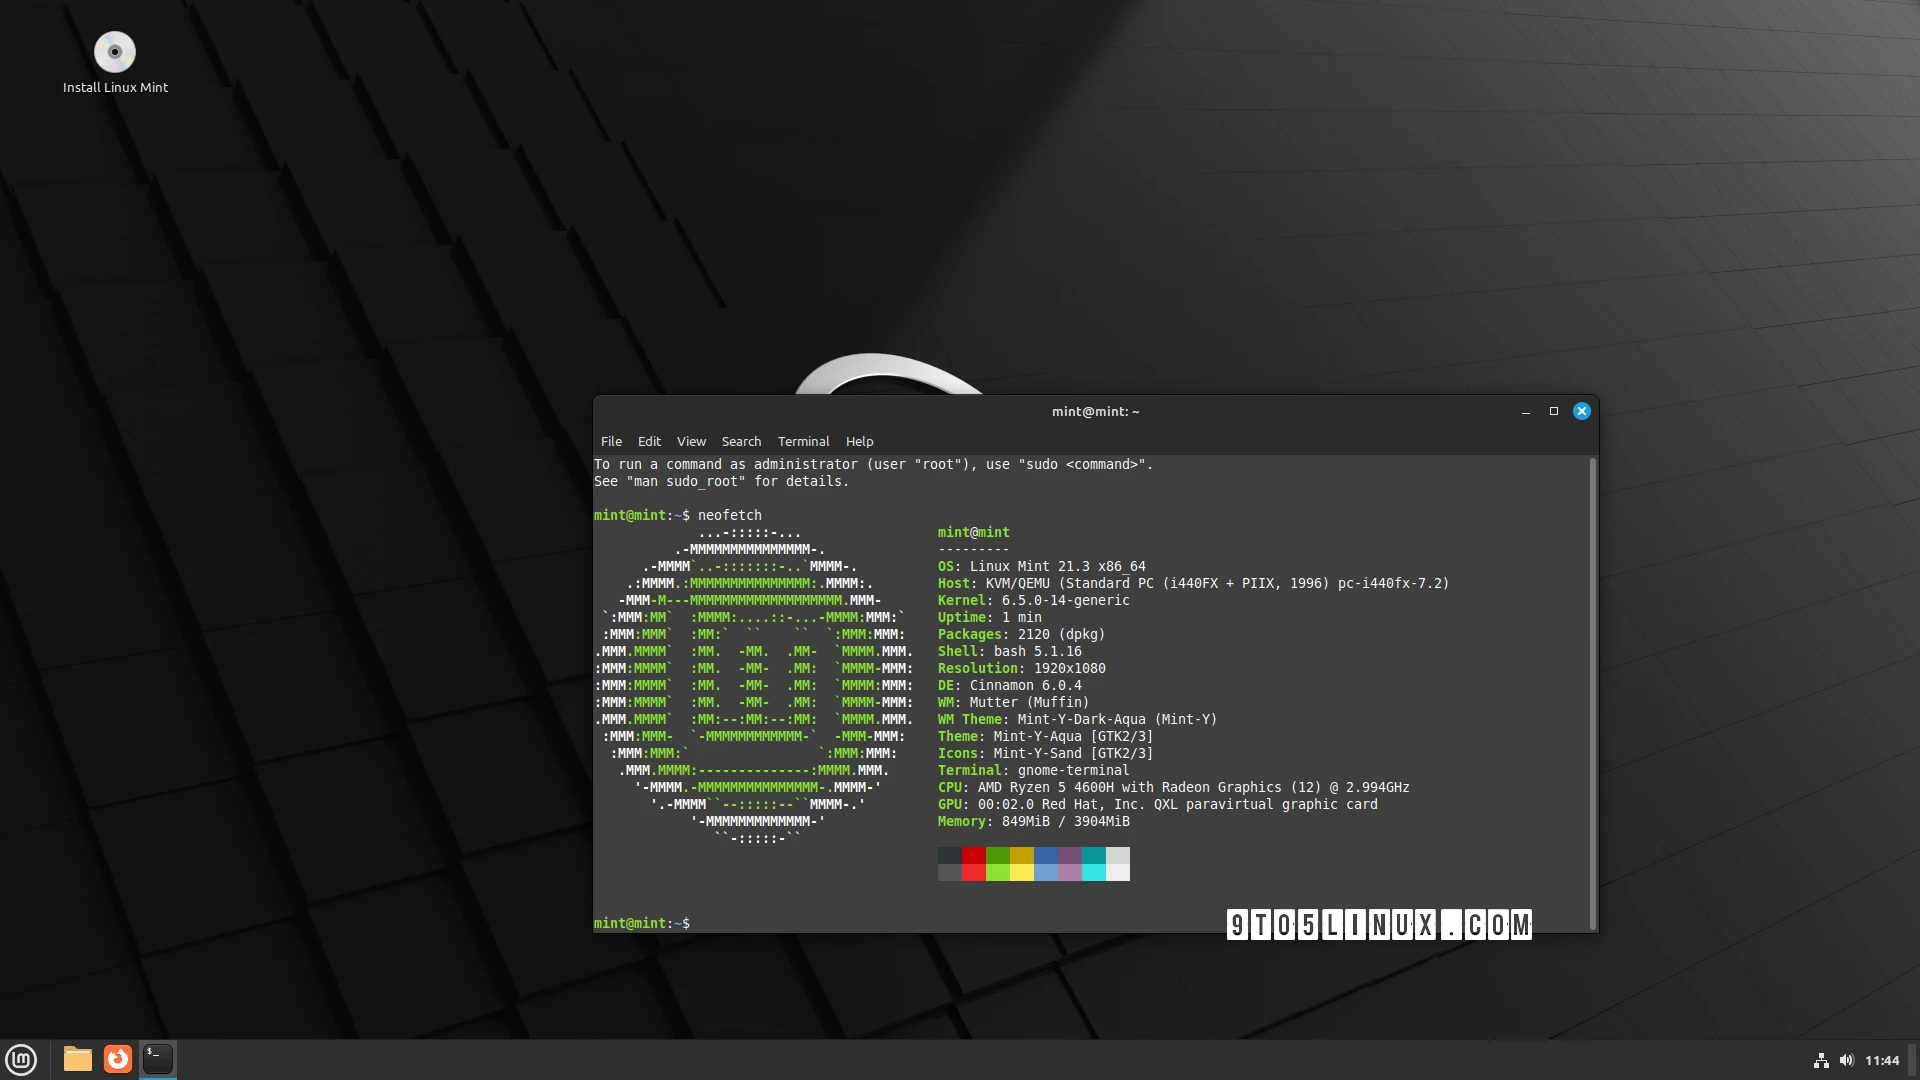 Linux Mint 21.3 “EDGE” ISO Released with Linux Kernel 6.5